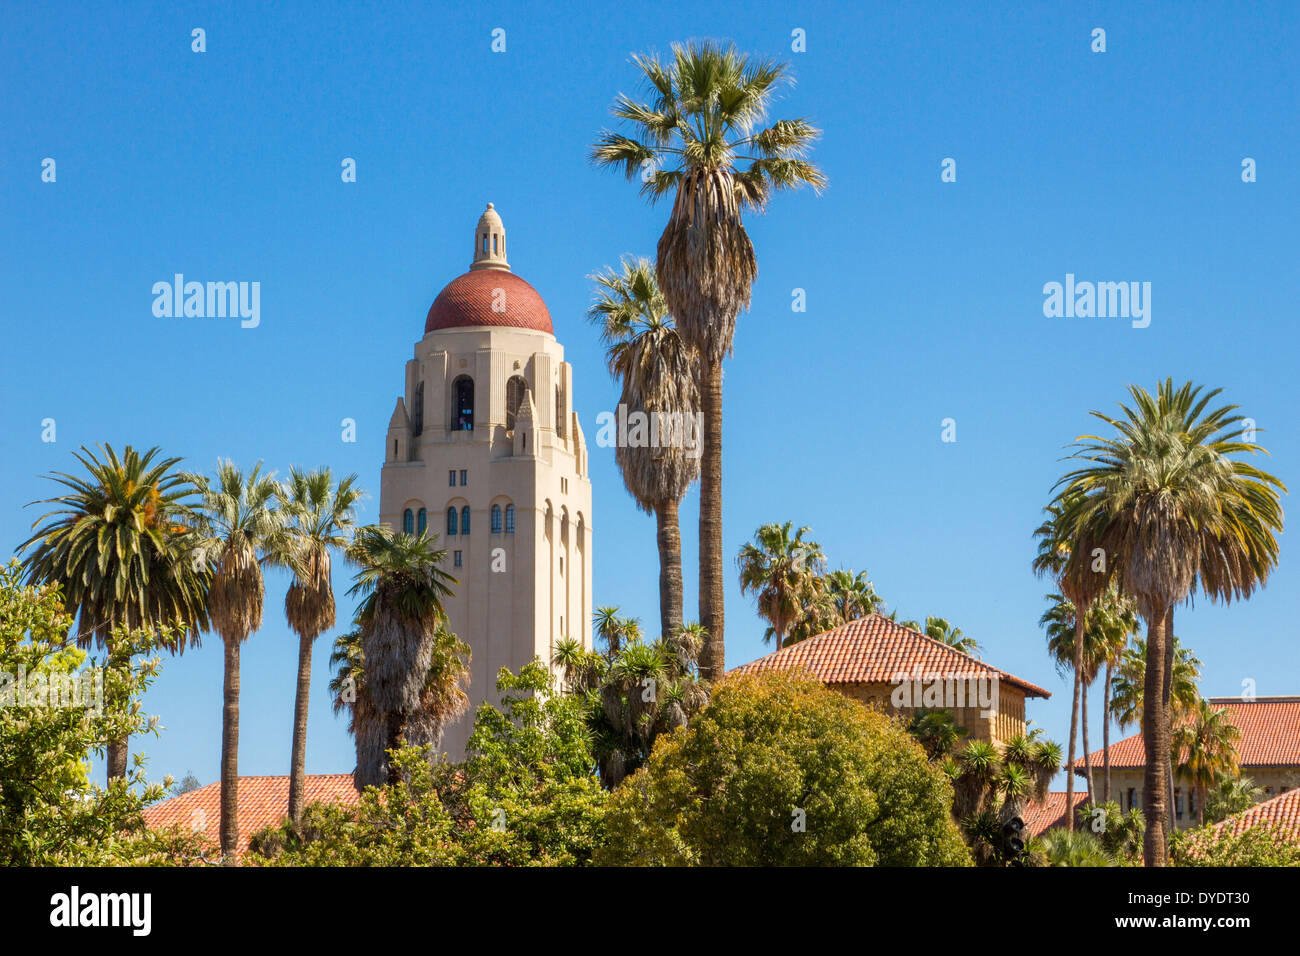 Hoover Tower sticking up among palm trees and red rooftops on Stanford University campus in California Stock Photo